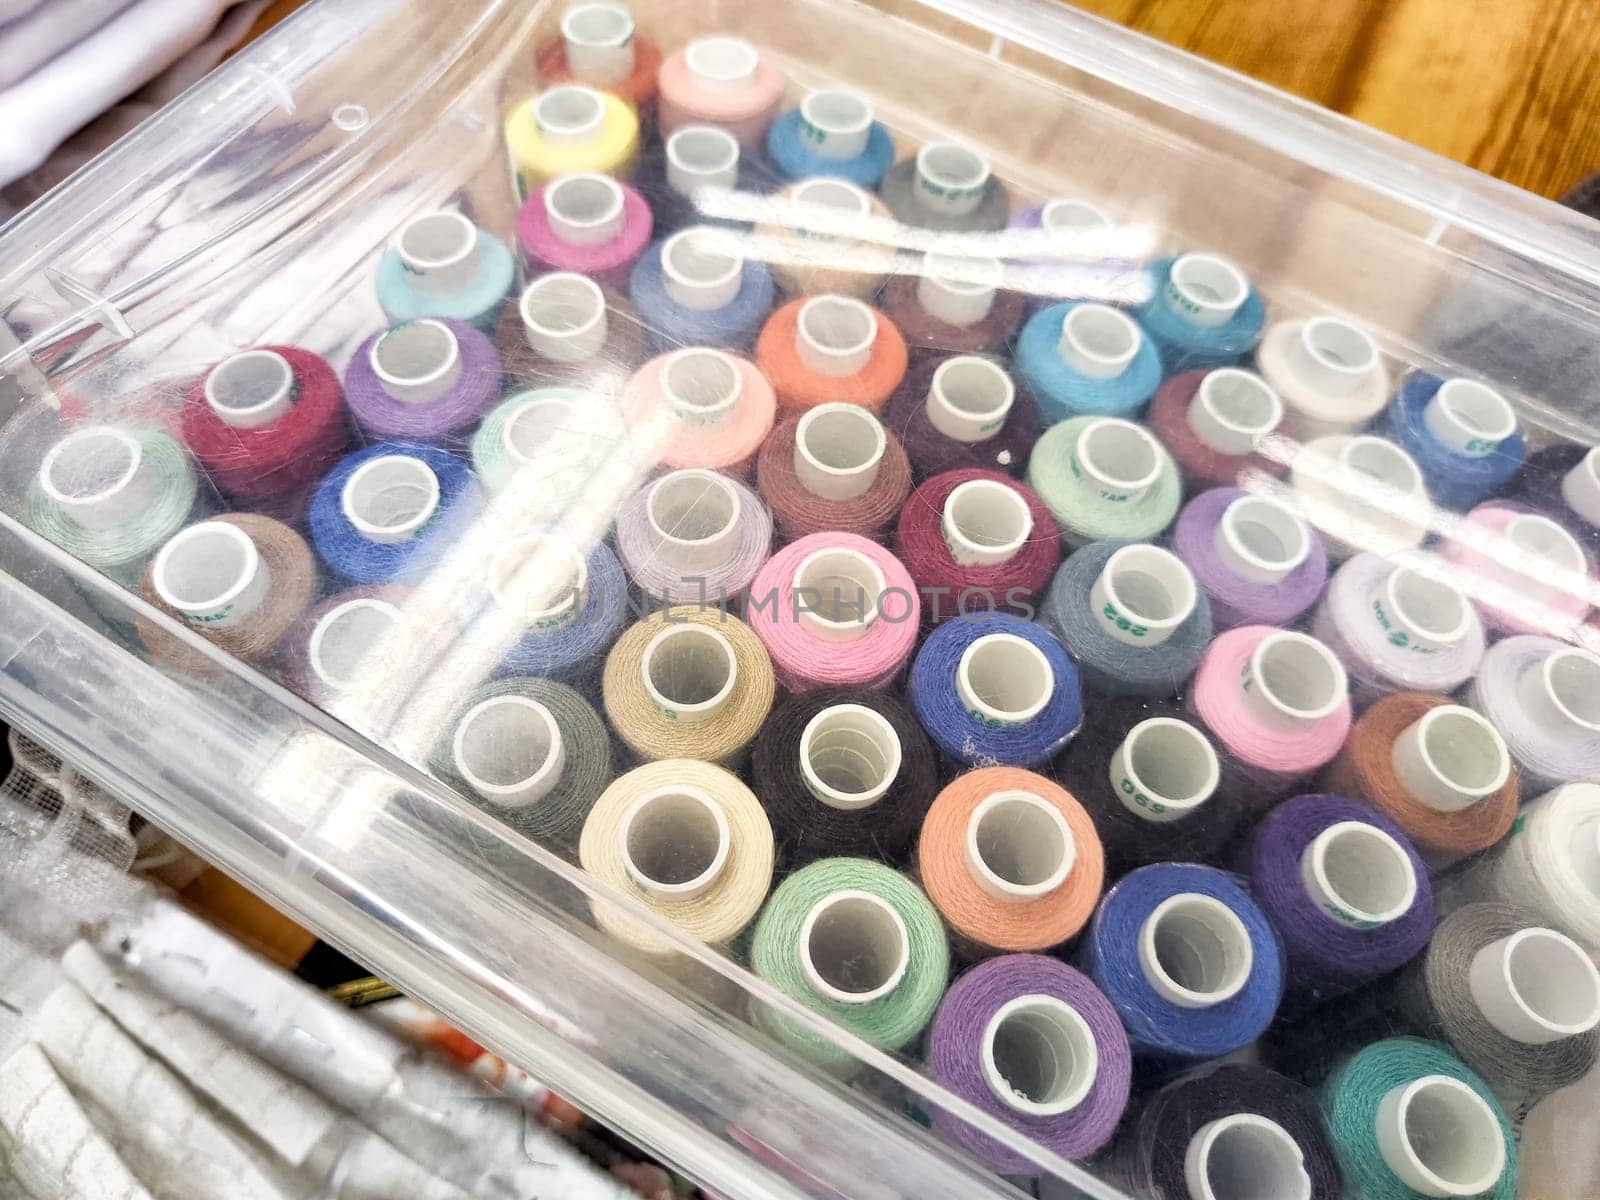 Vibrant Array of Thread Spools in Transparent Storage Box. Colorful thread spools neatly arranged in a clear plastic container